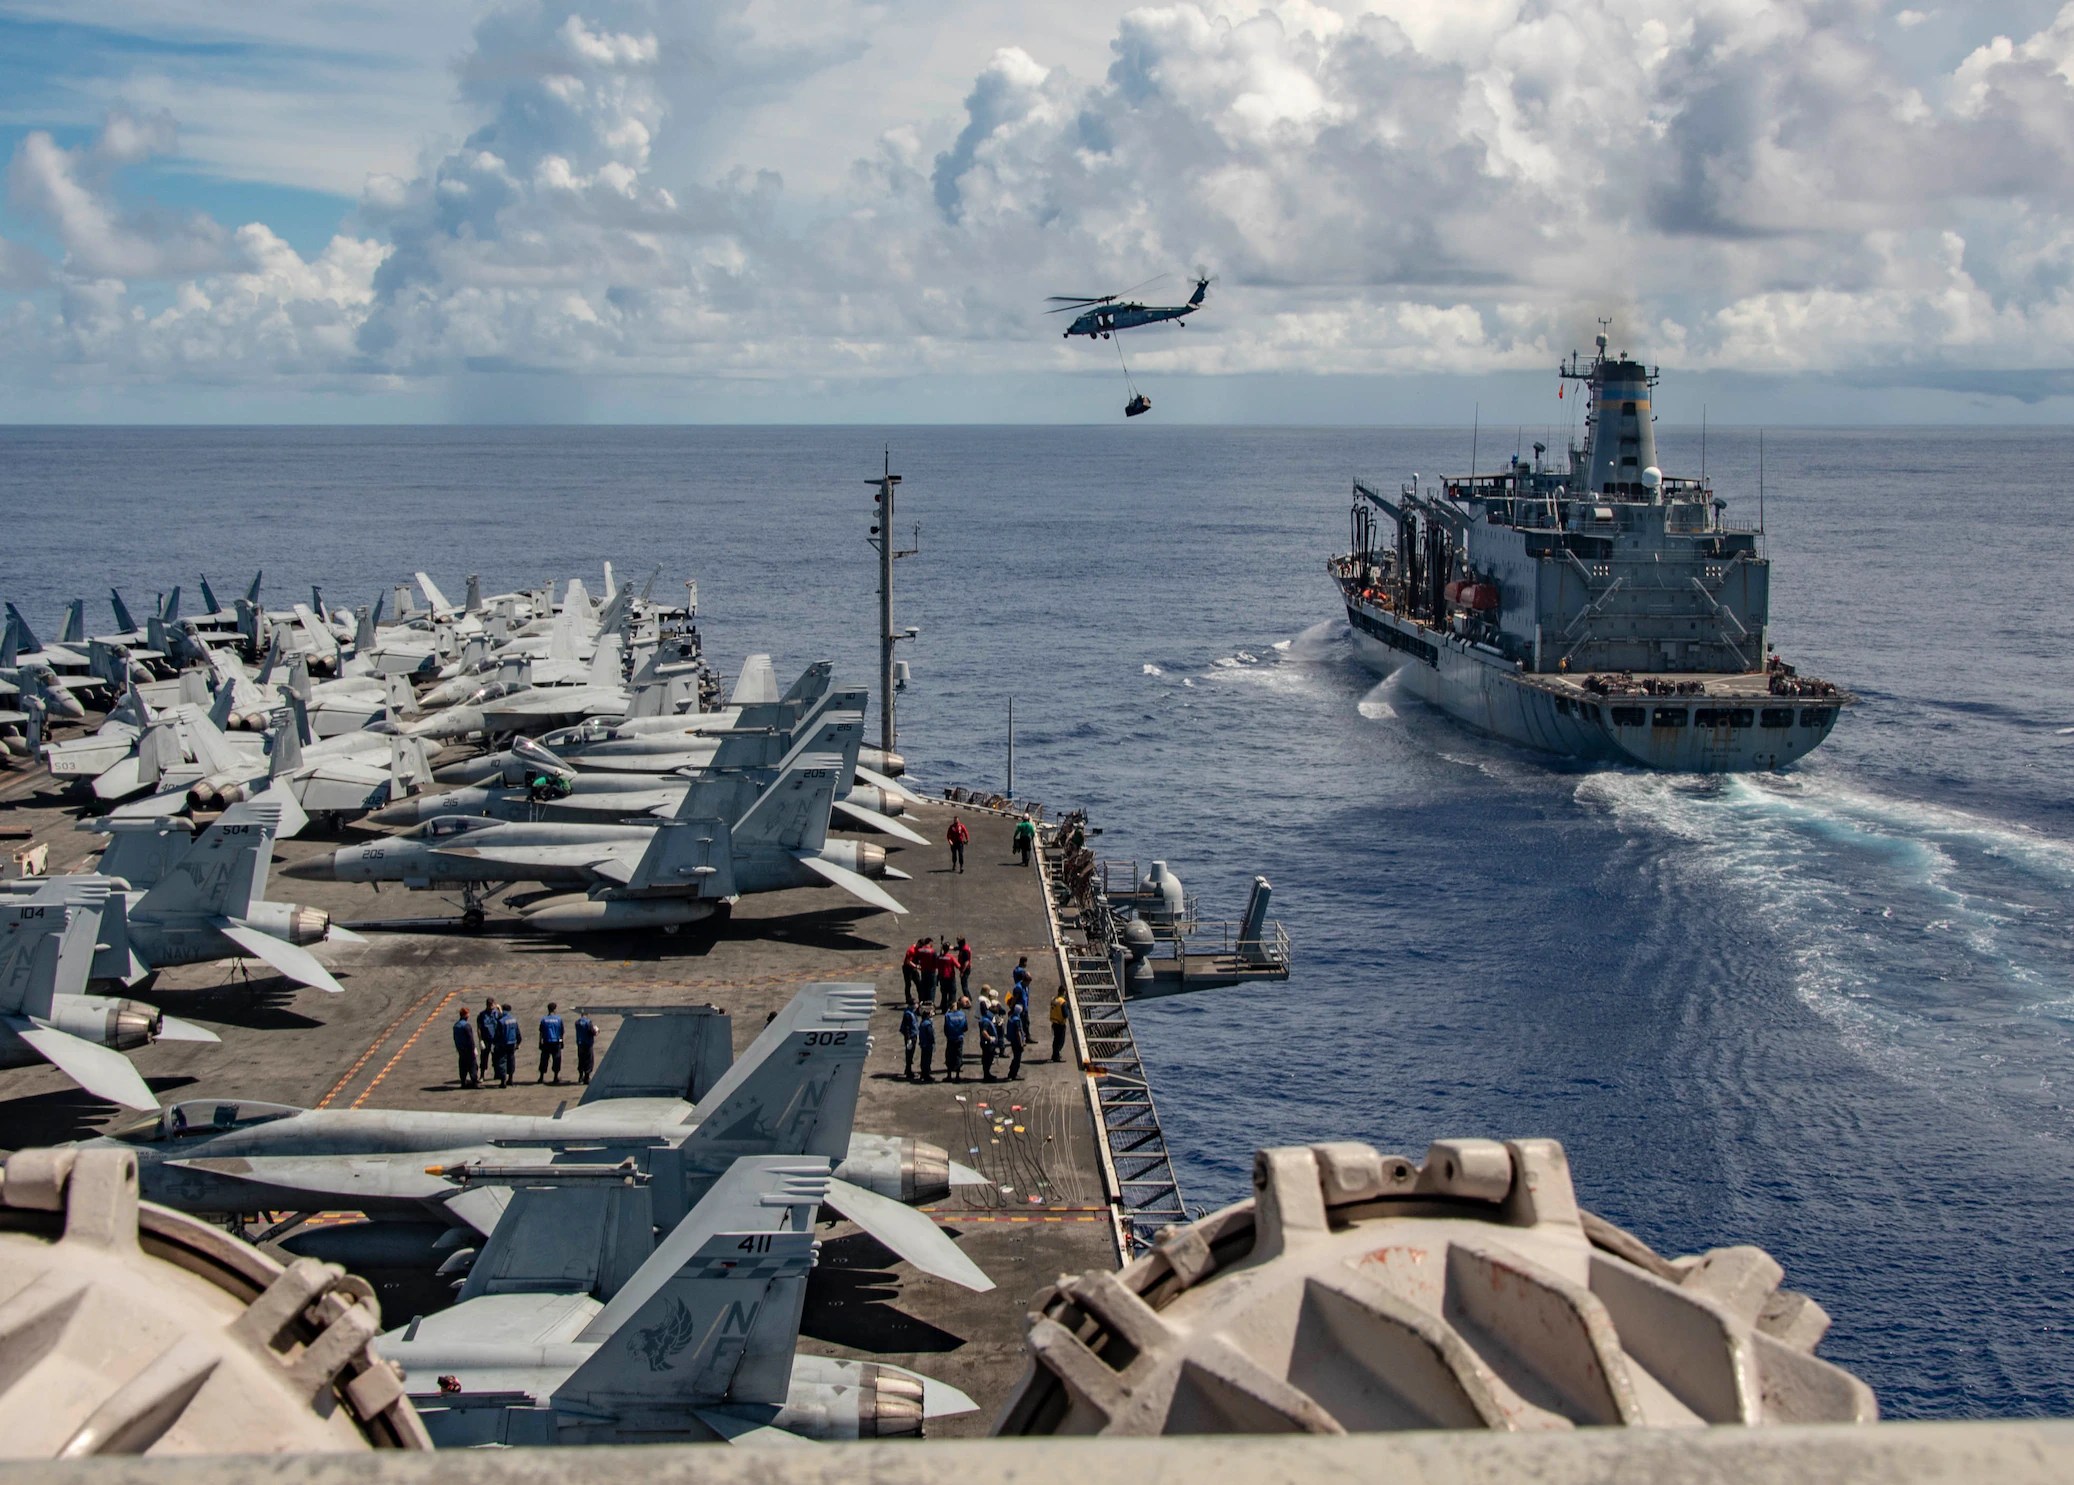 A US Navy Black Hawk helicopter carries a supply load from a fleet replenishment tanker to an aircraft carrier.